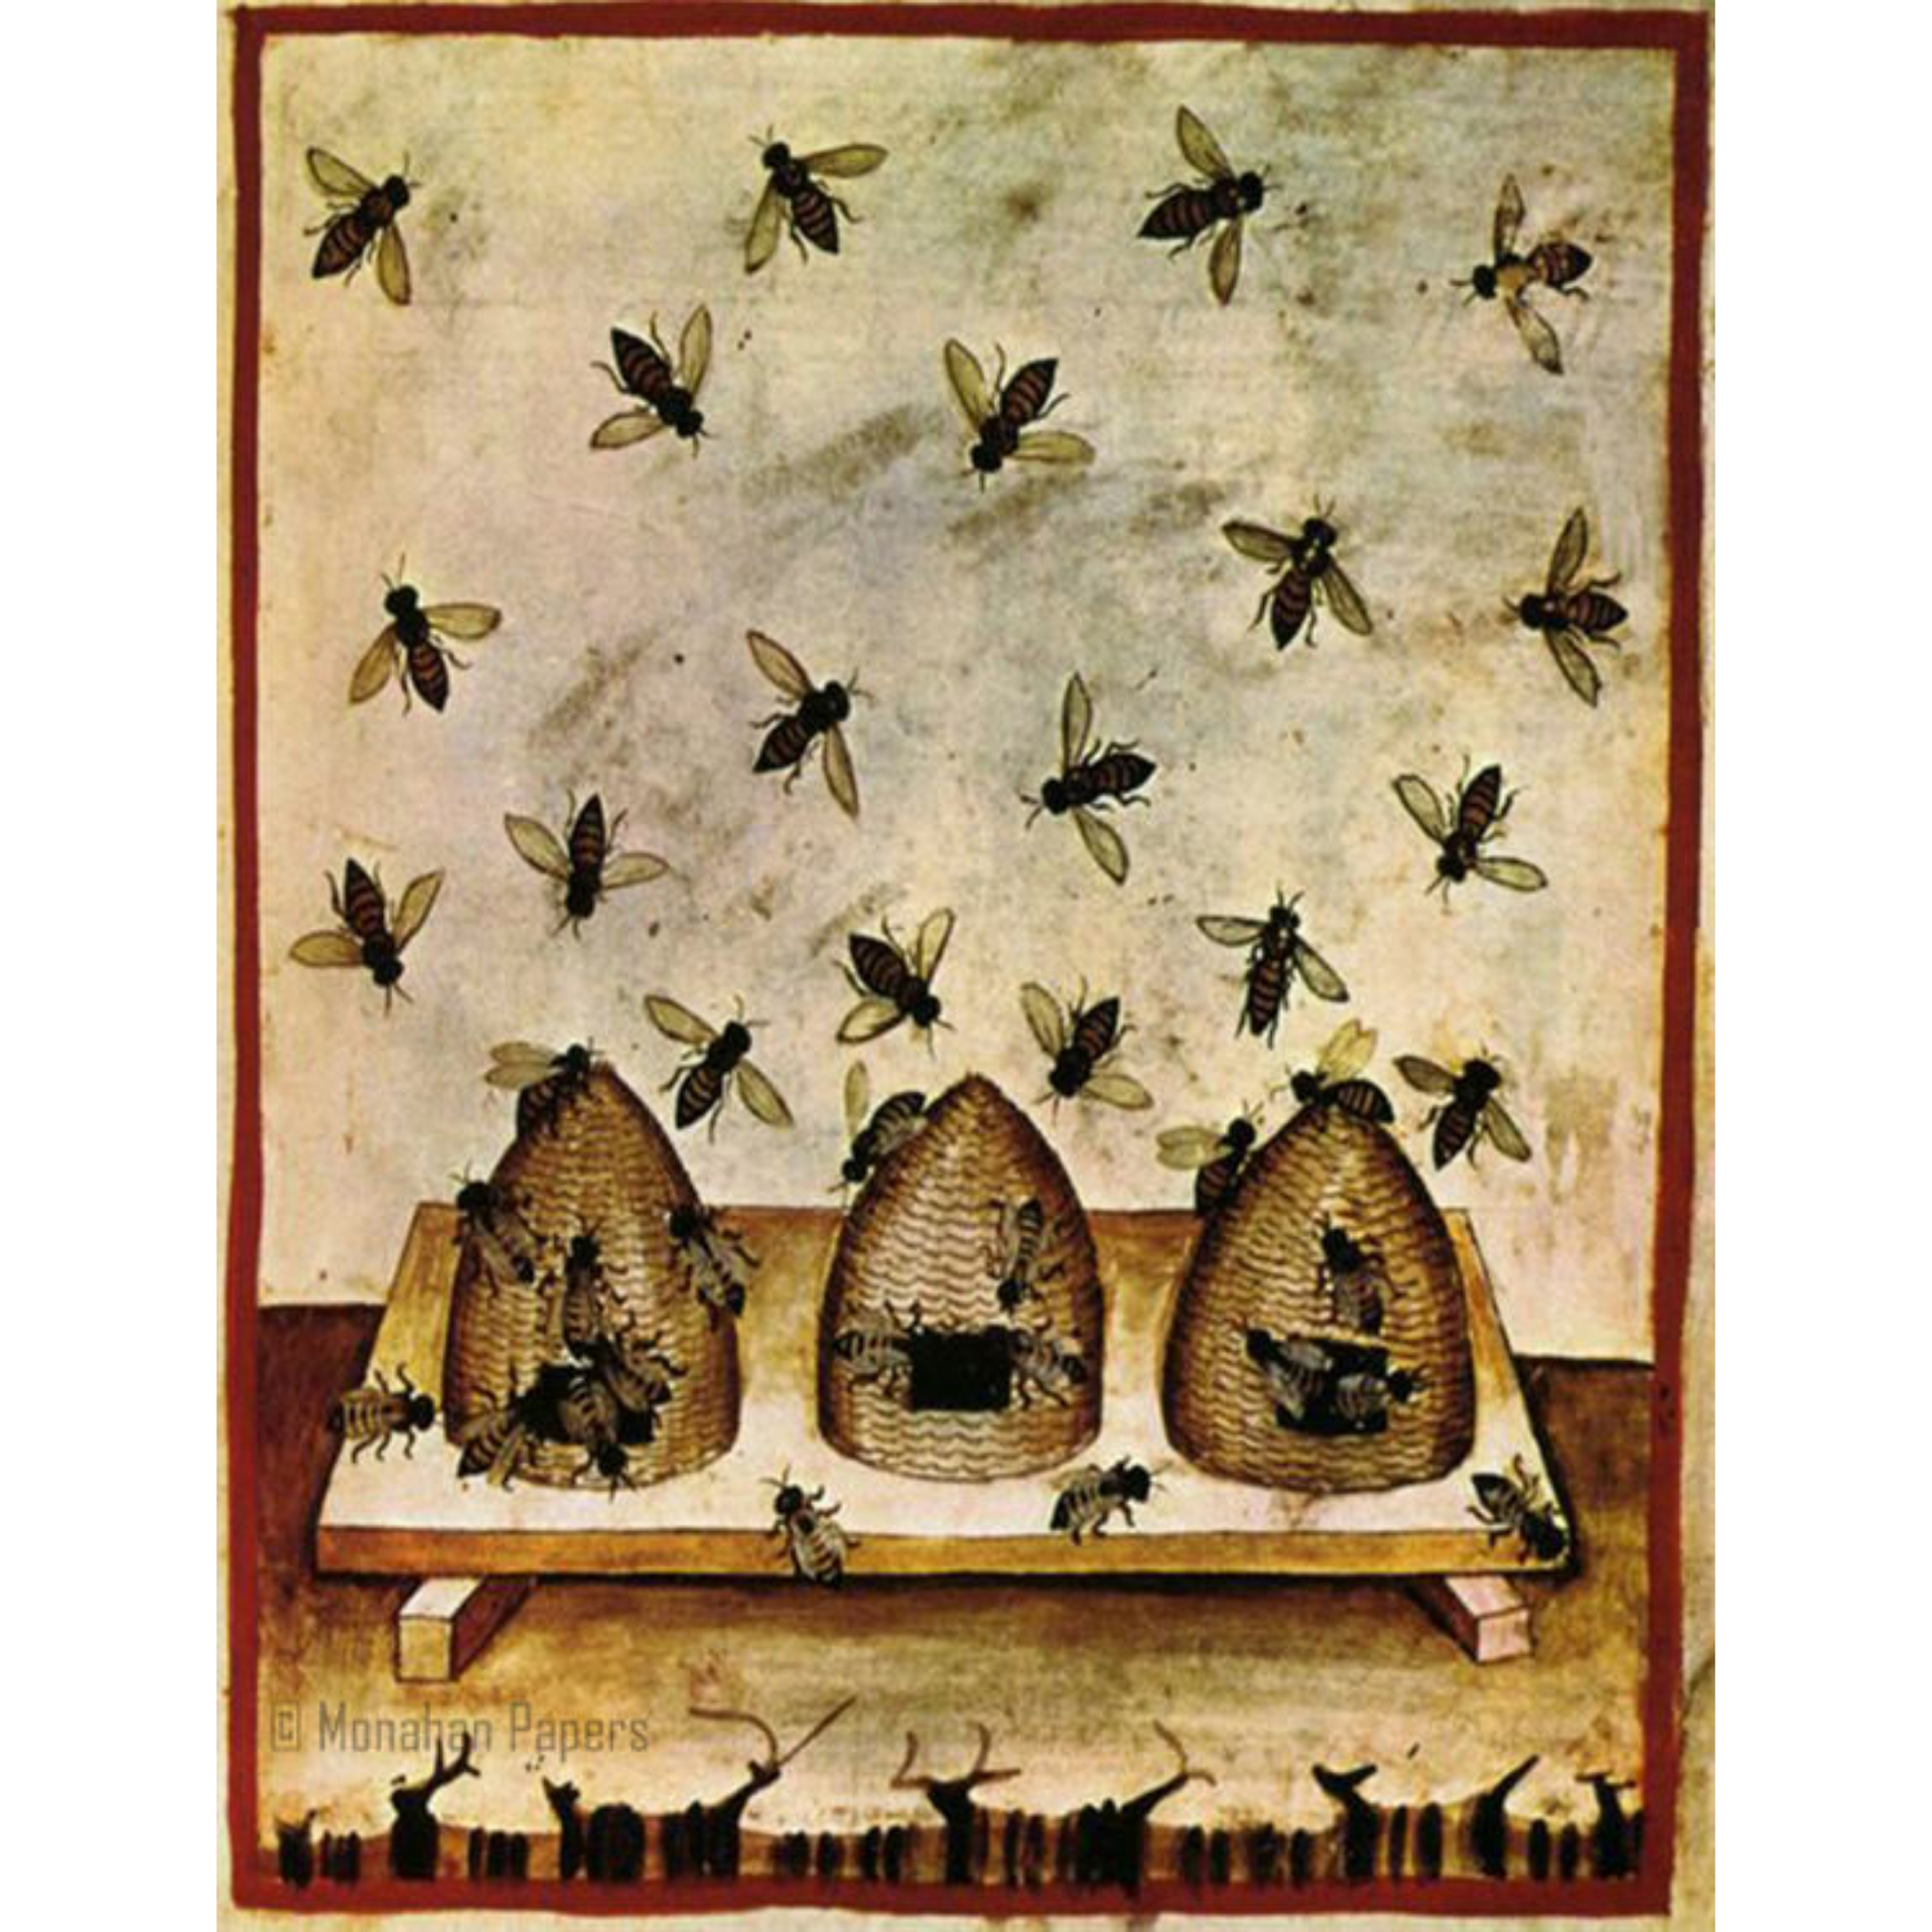 Beehives in Burgundy X45 Decoupage Paper by Monahan Papers available at Milton's Daughter.  Three beehives with bumble bees framed with burgundy stripe.  11" x  17".